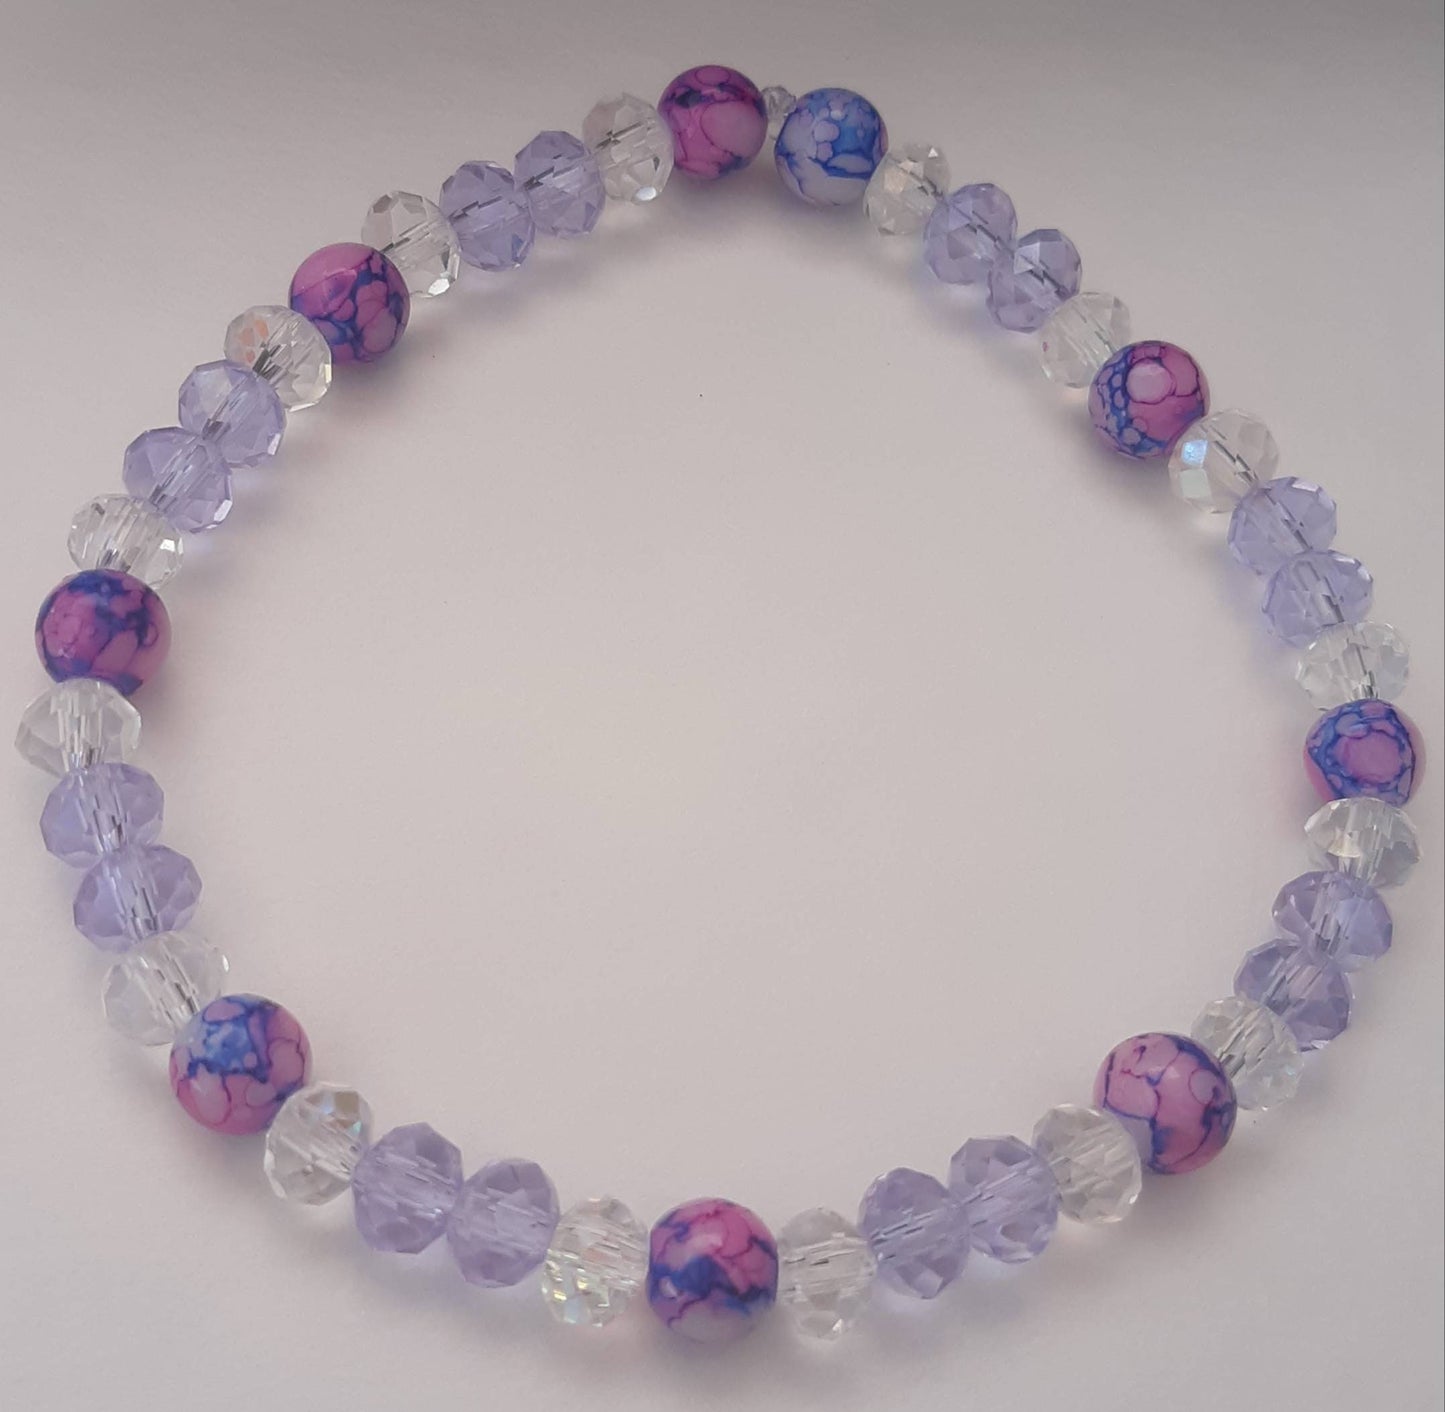 Neon Collection: Lavender and Purple Sparkly Marbled Bracelet